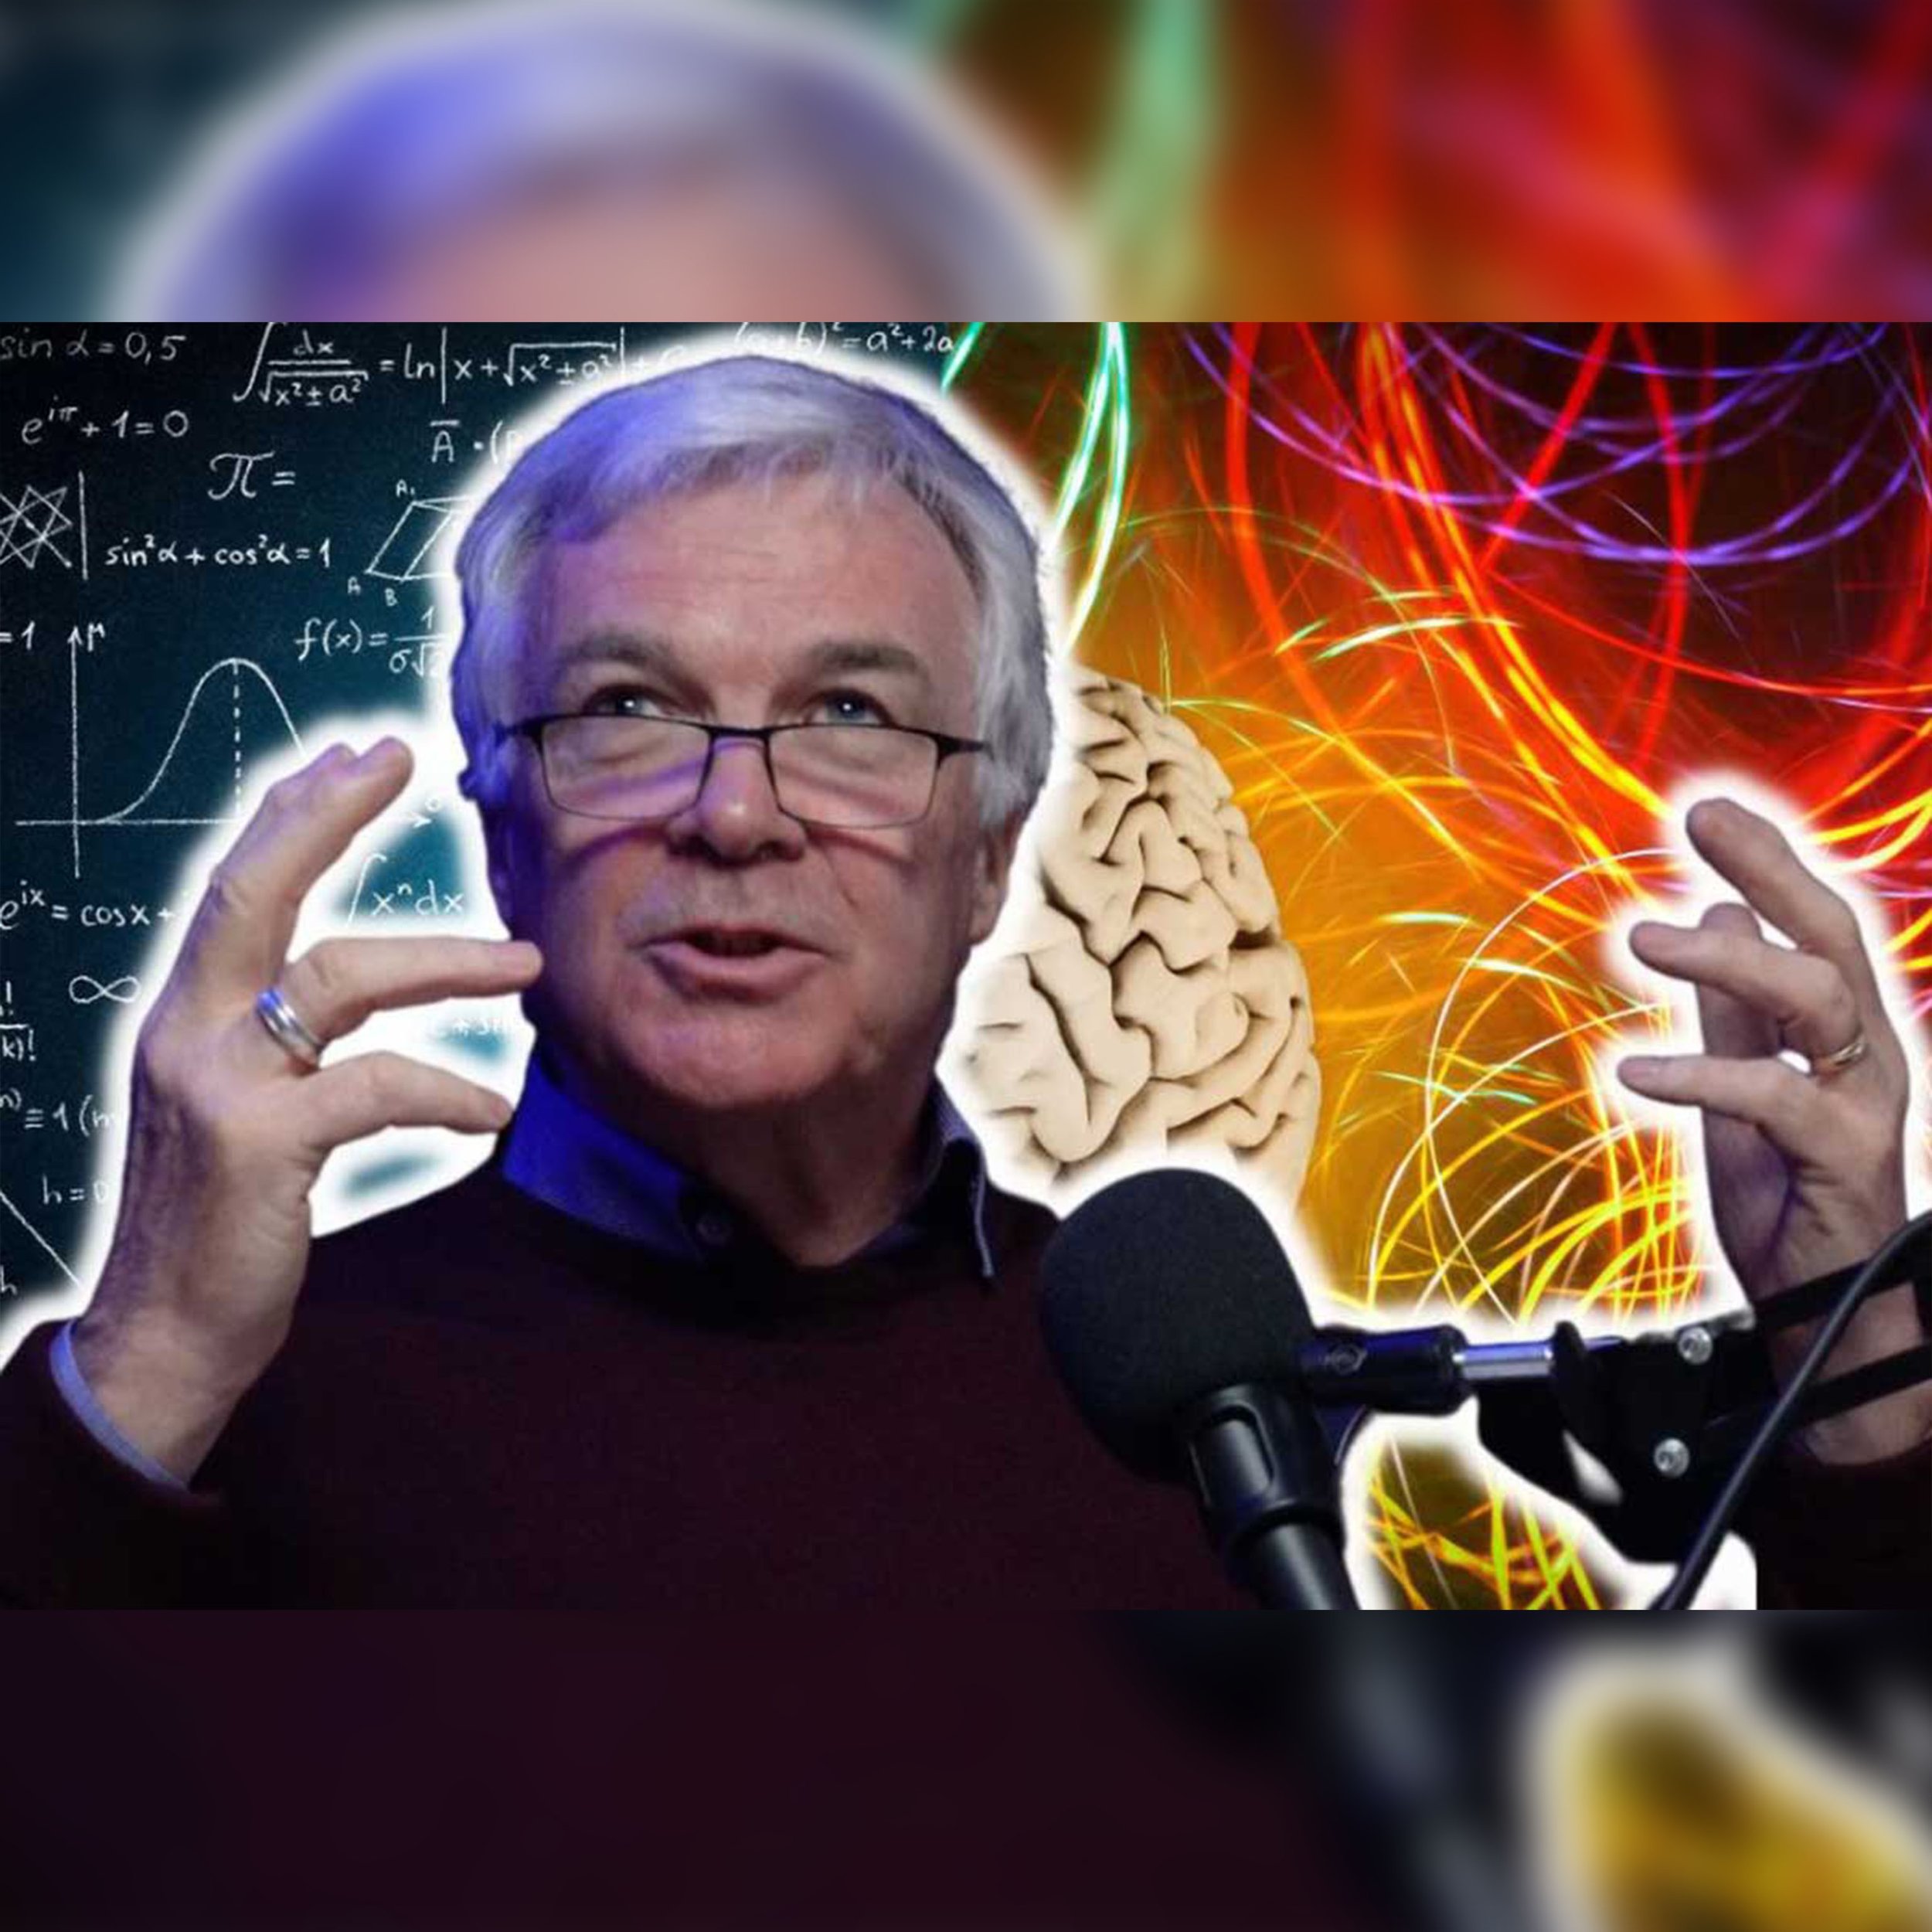 UNLOCK YOUR BRAIN with Dr. John Kelly